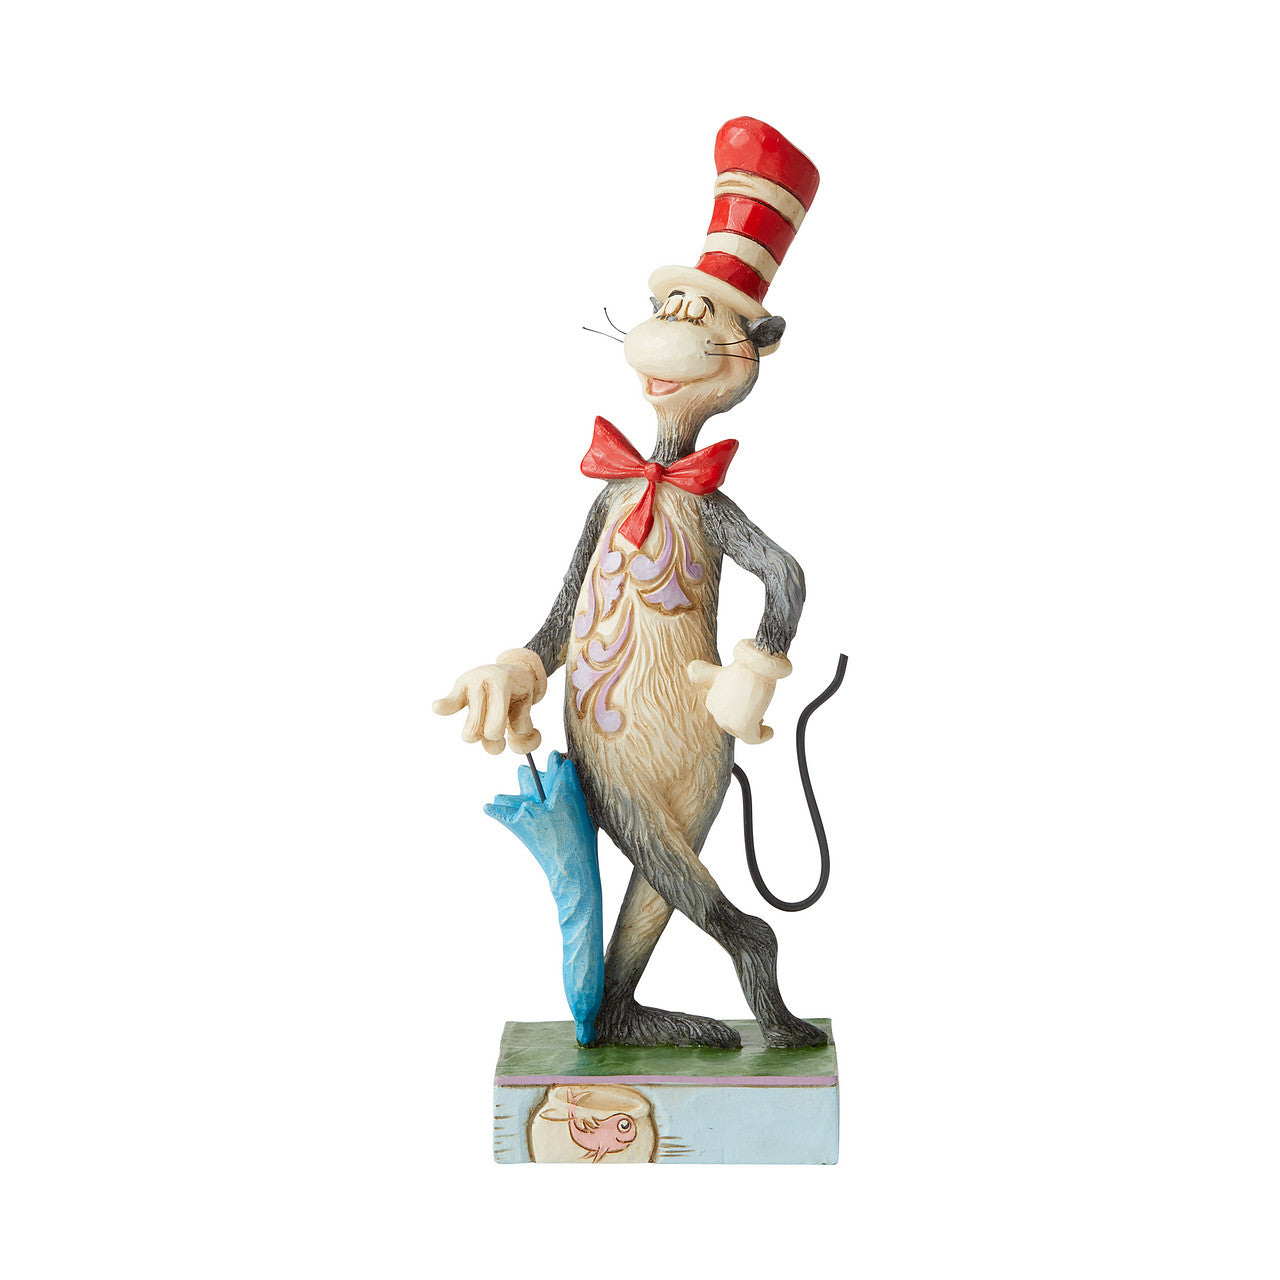 Jim Shore Dr. Seuss The Cat in the Hat with Umbrella Figurine  The infamous Cat in the Hat leans coolly against his umbrella in this classic Dr. Seuss figurine. With a towering red and white striped hat and winsome whiskers this cat is a winning and whimsical Jim Shore collectible.